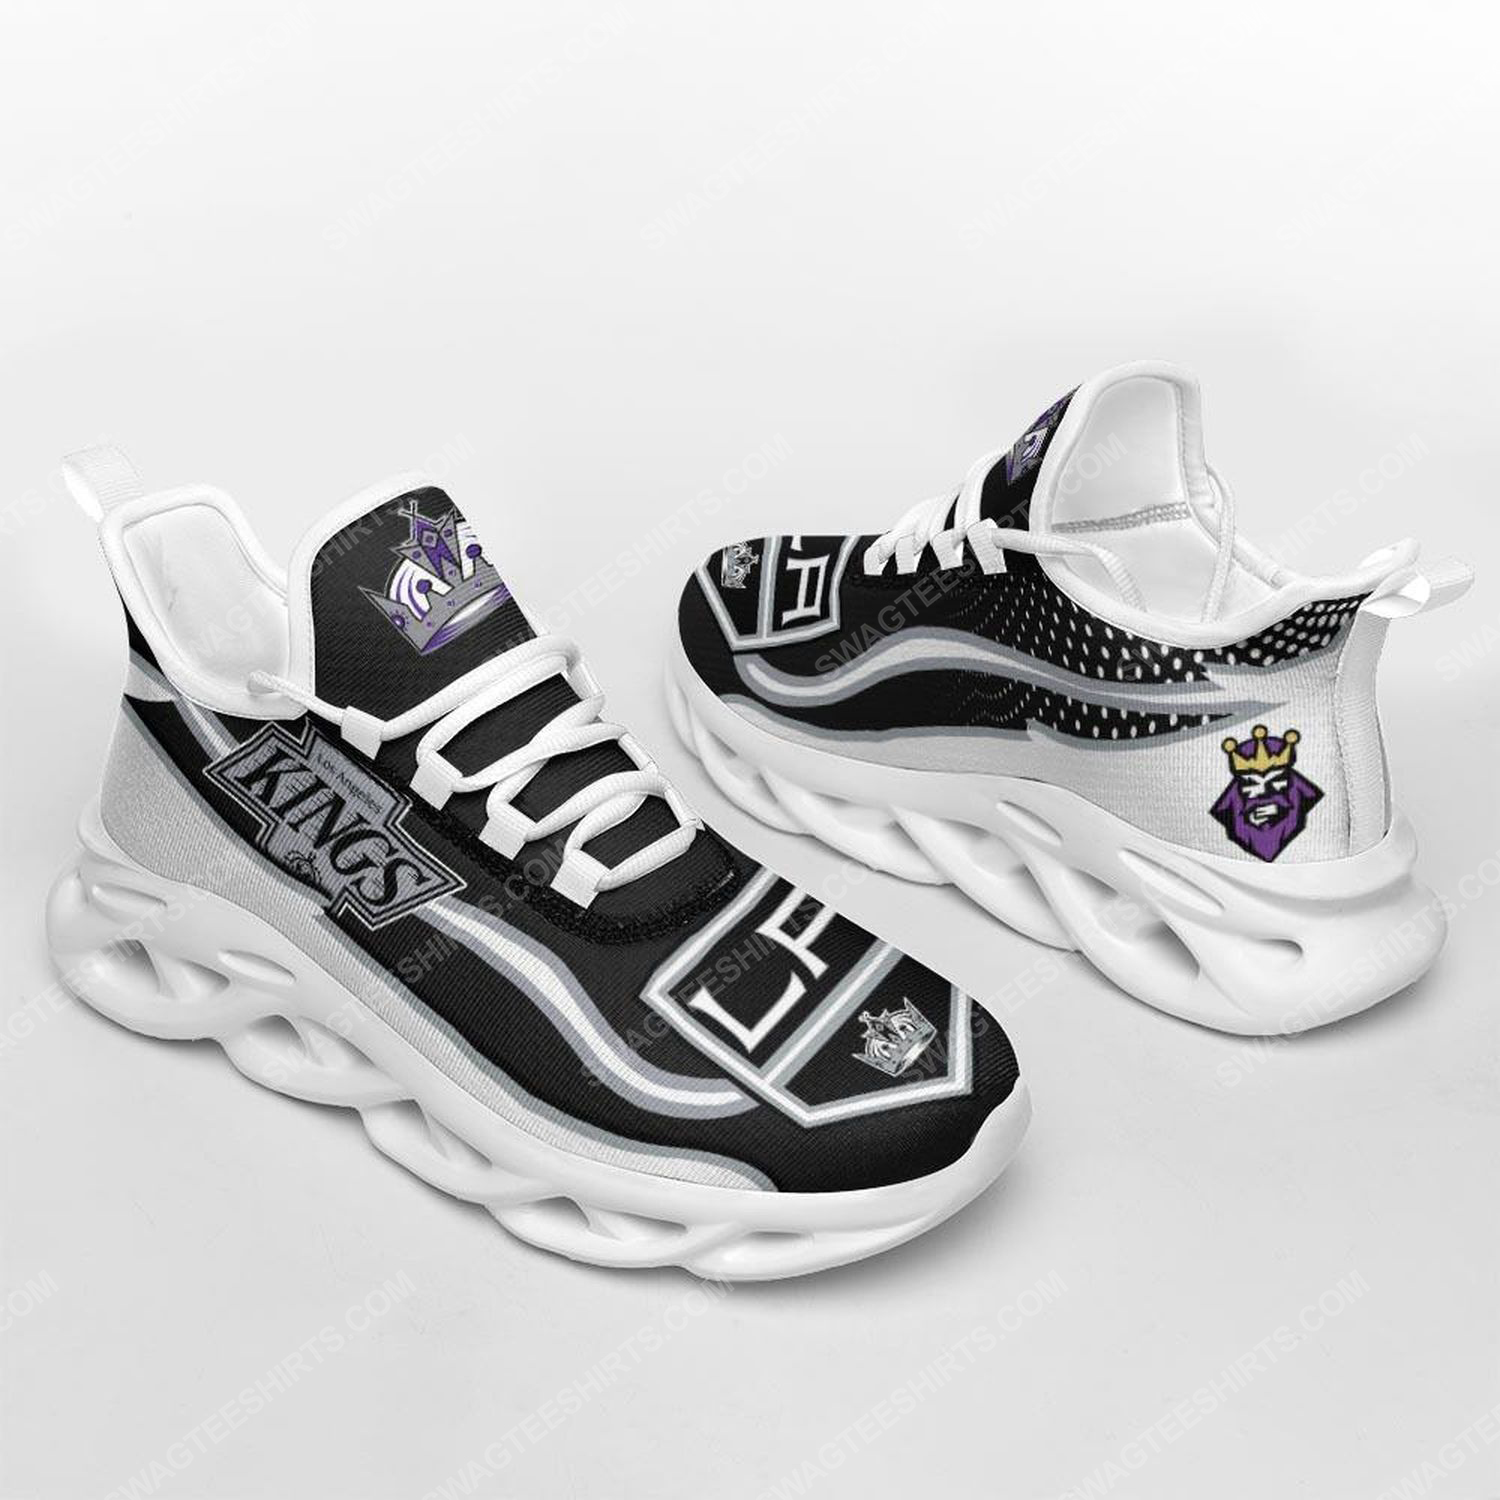 [special edition] The los angeles kings hockey team max soul shoes – Maria